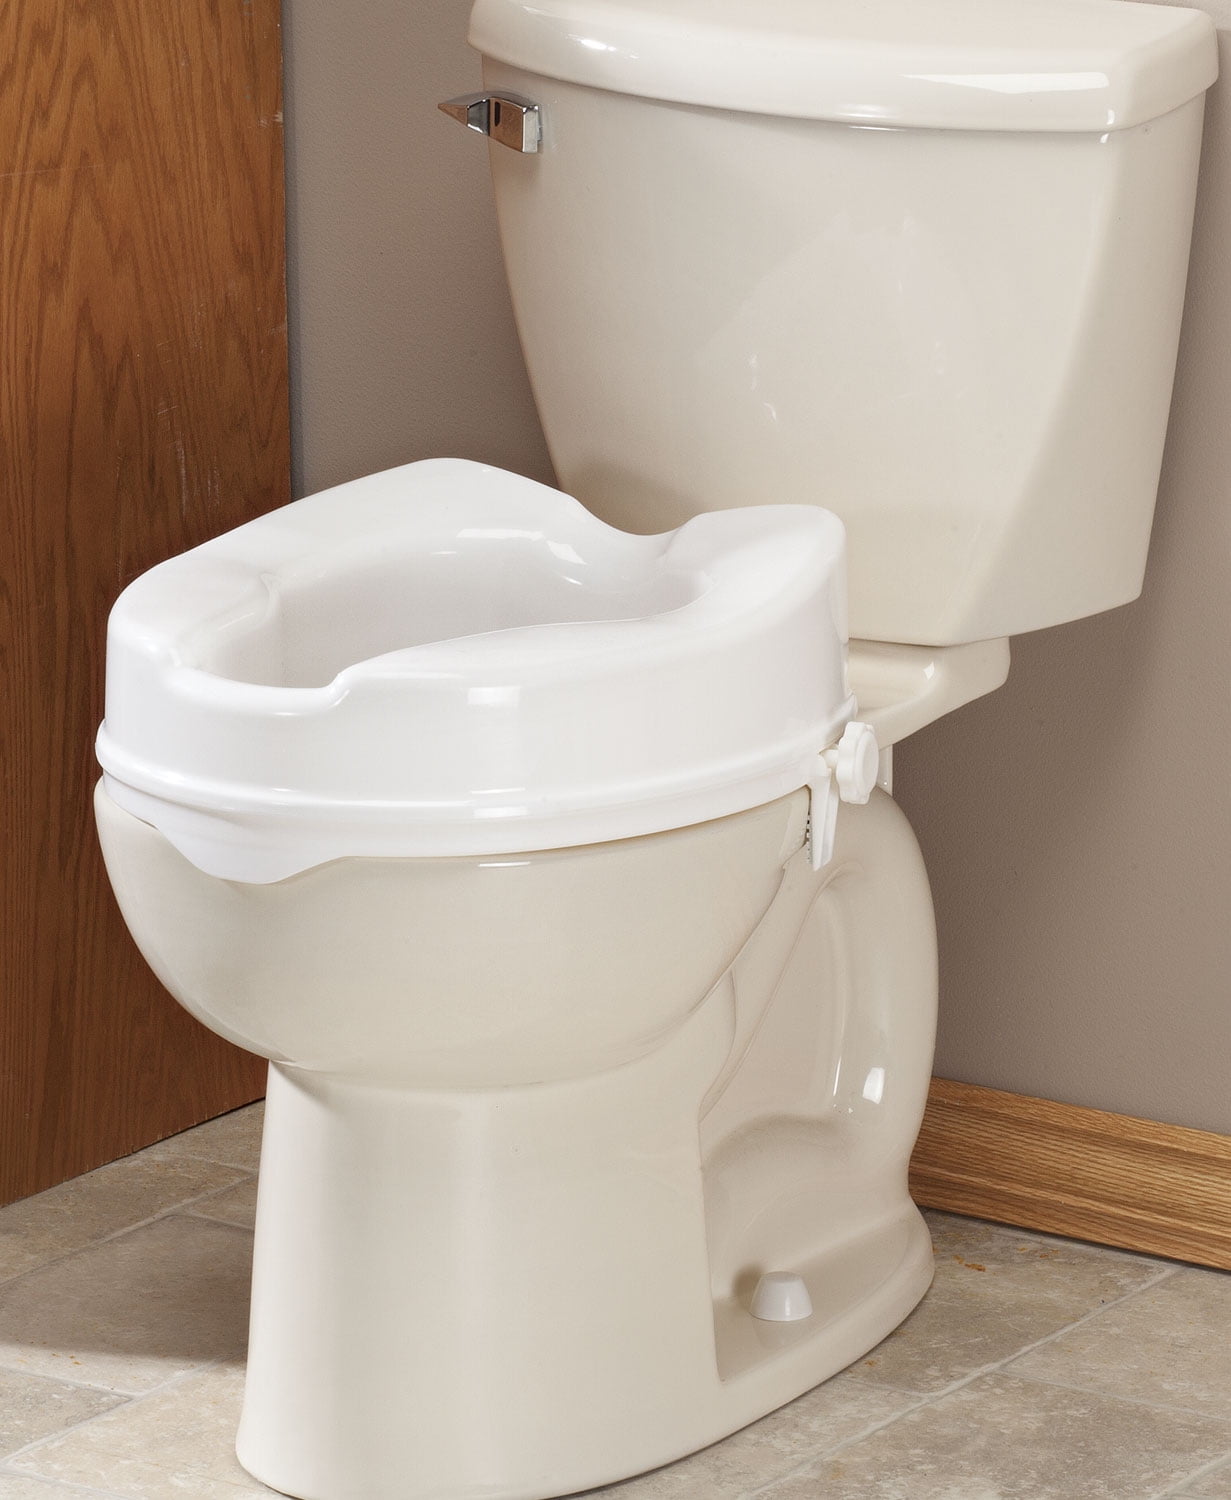 OasisSpace Stand Alone Raised Toilet Seat 300lb - Heavy Duty Medical Raised  Homecare Commode and Safety Frame, Height Adjustable Legs, Bathroom Assist